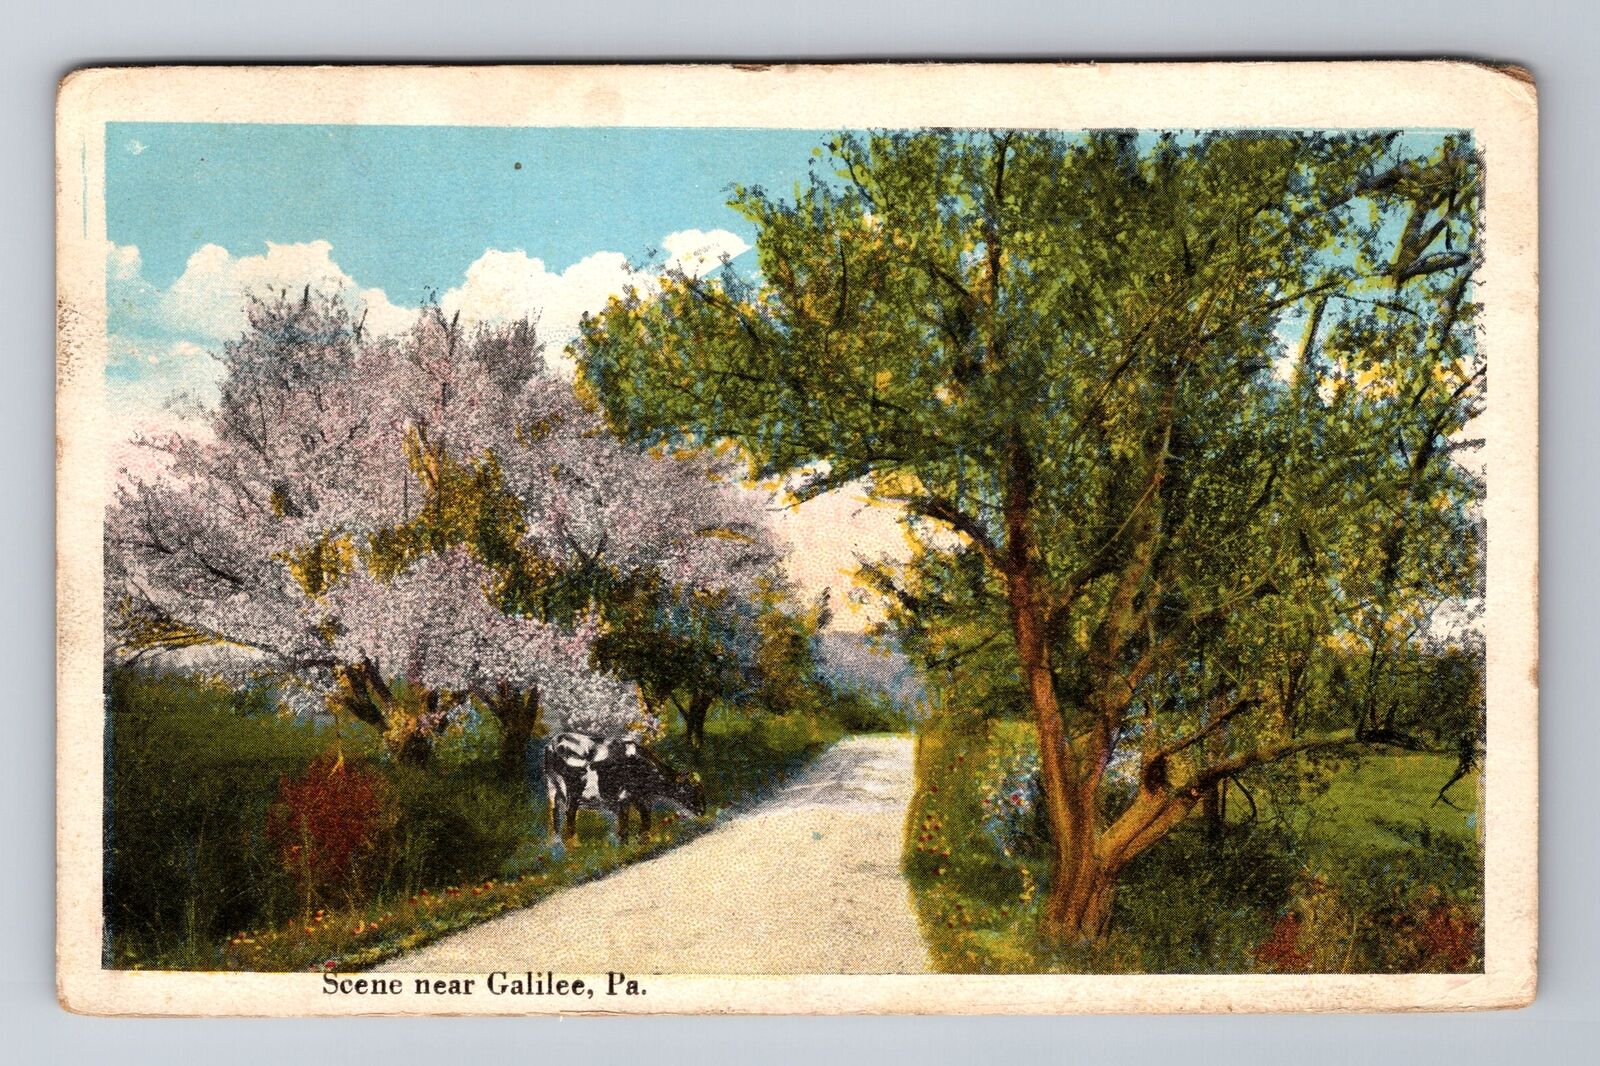 Galilee PA-Pennsylvania, General Country Greeting Antique Vintage c1921 Postcard